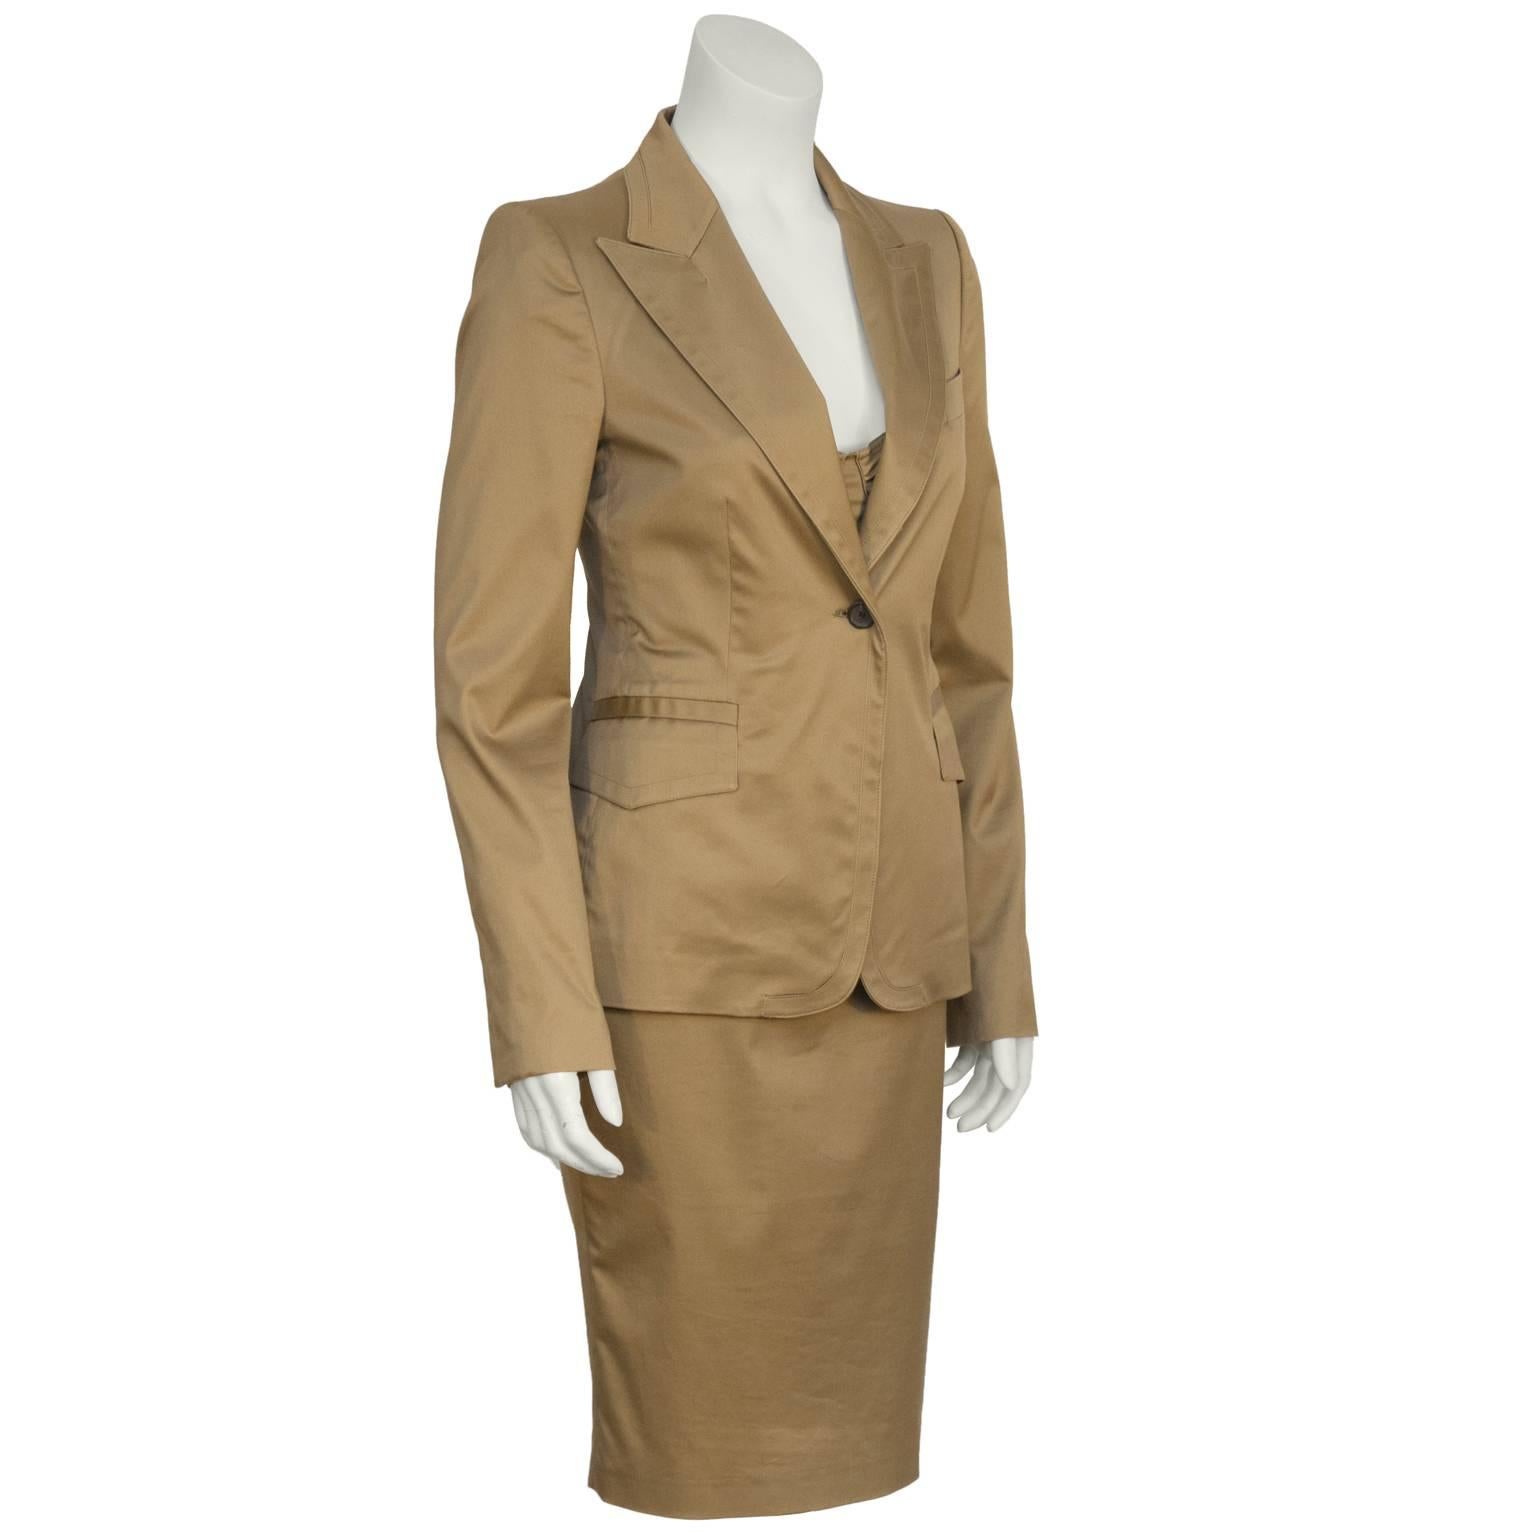 Women's 2003 Gucci by Tom Ford Khaki Dress and Jacket Set